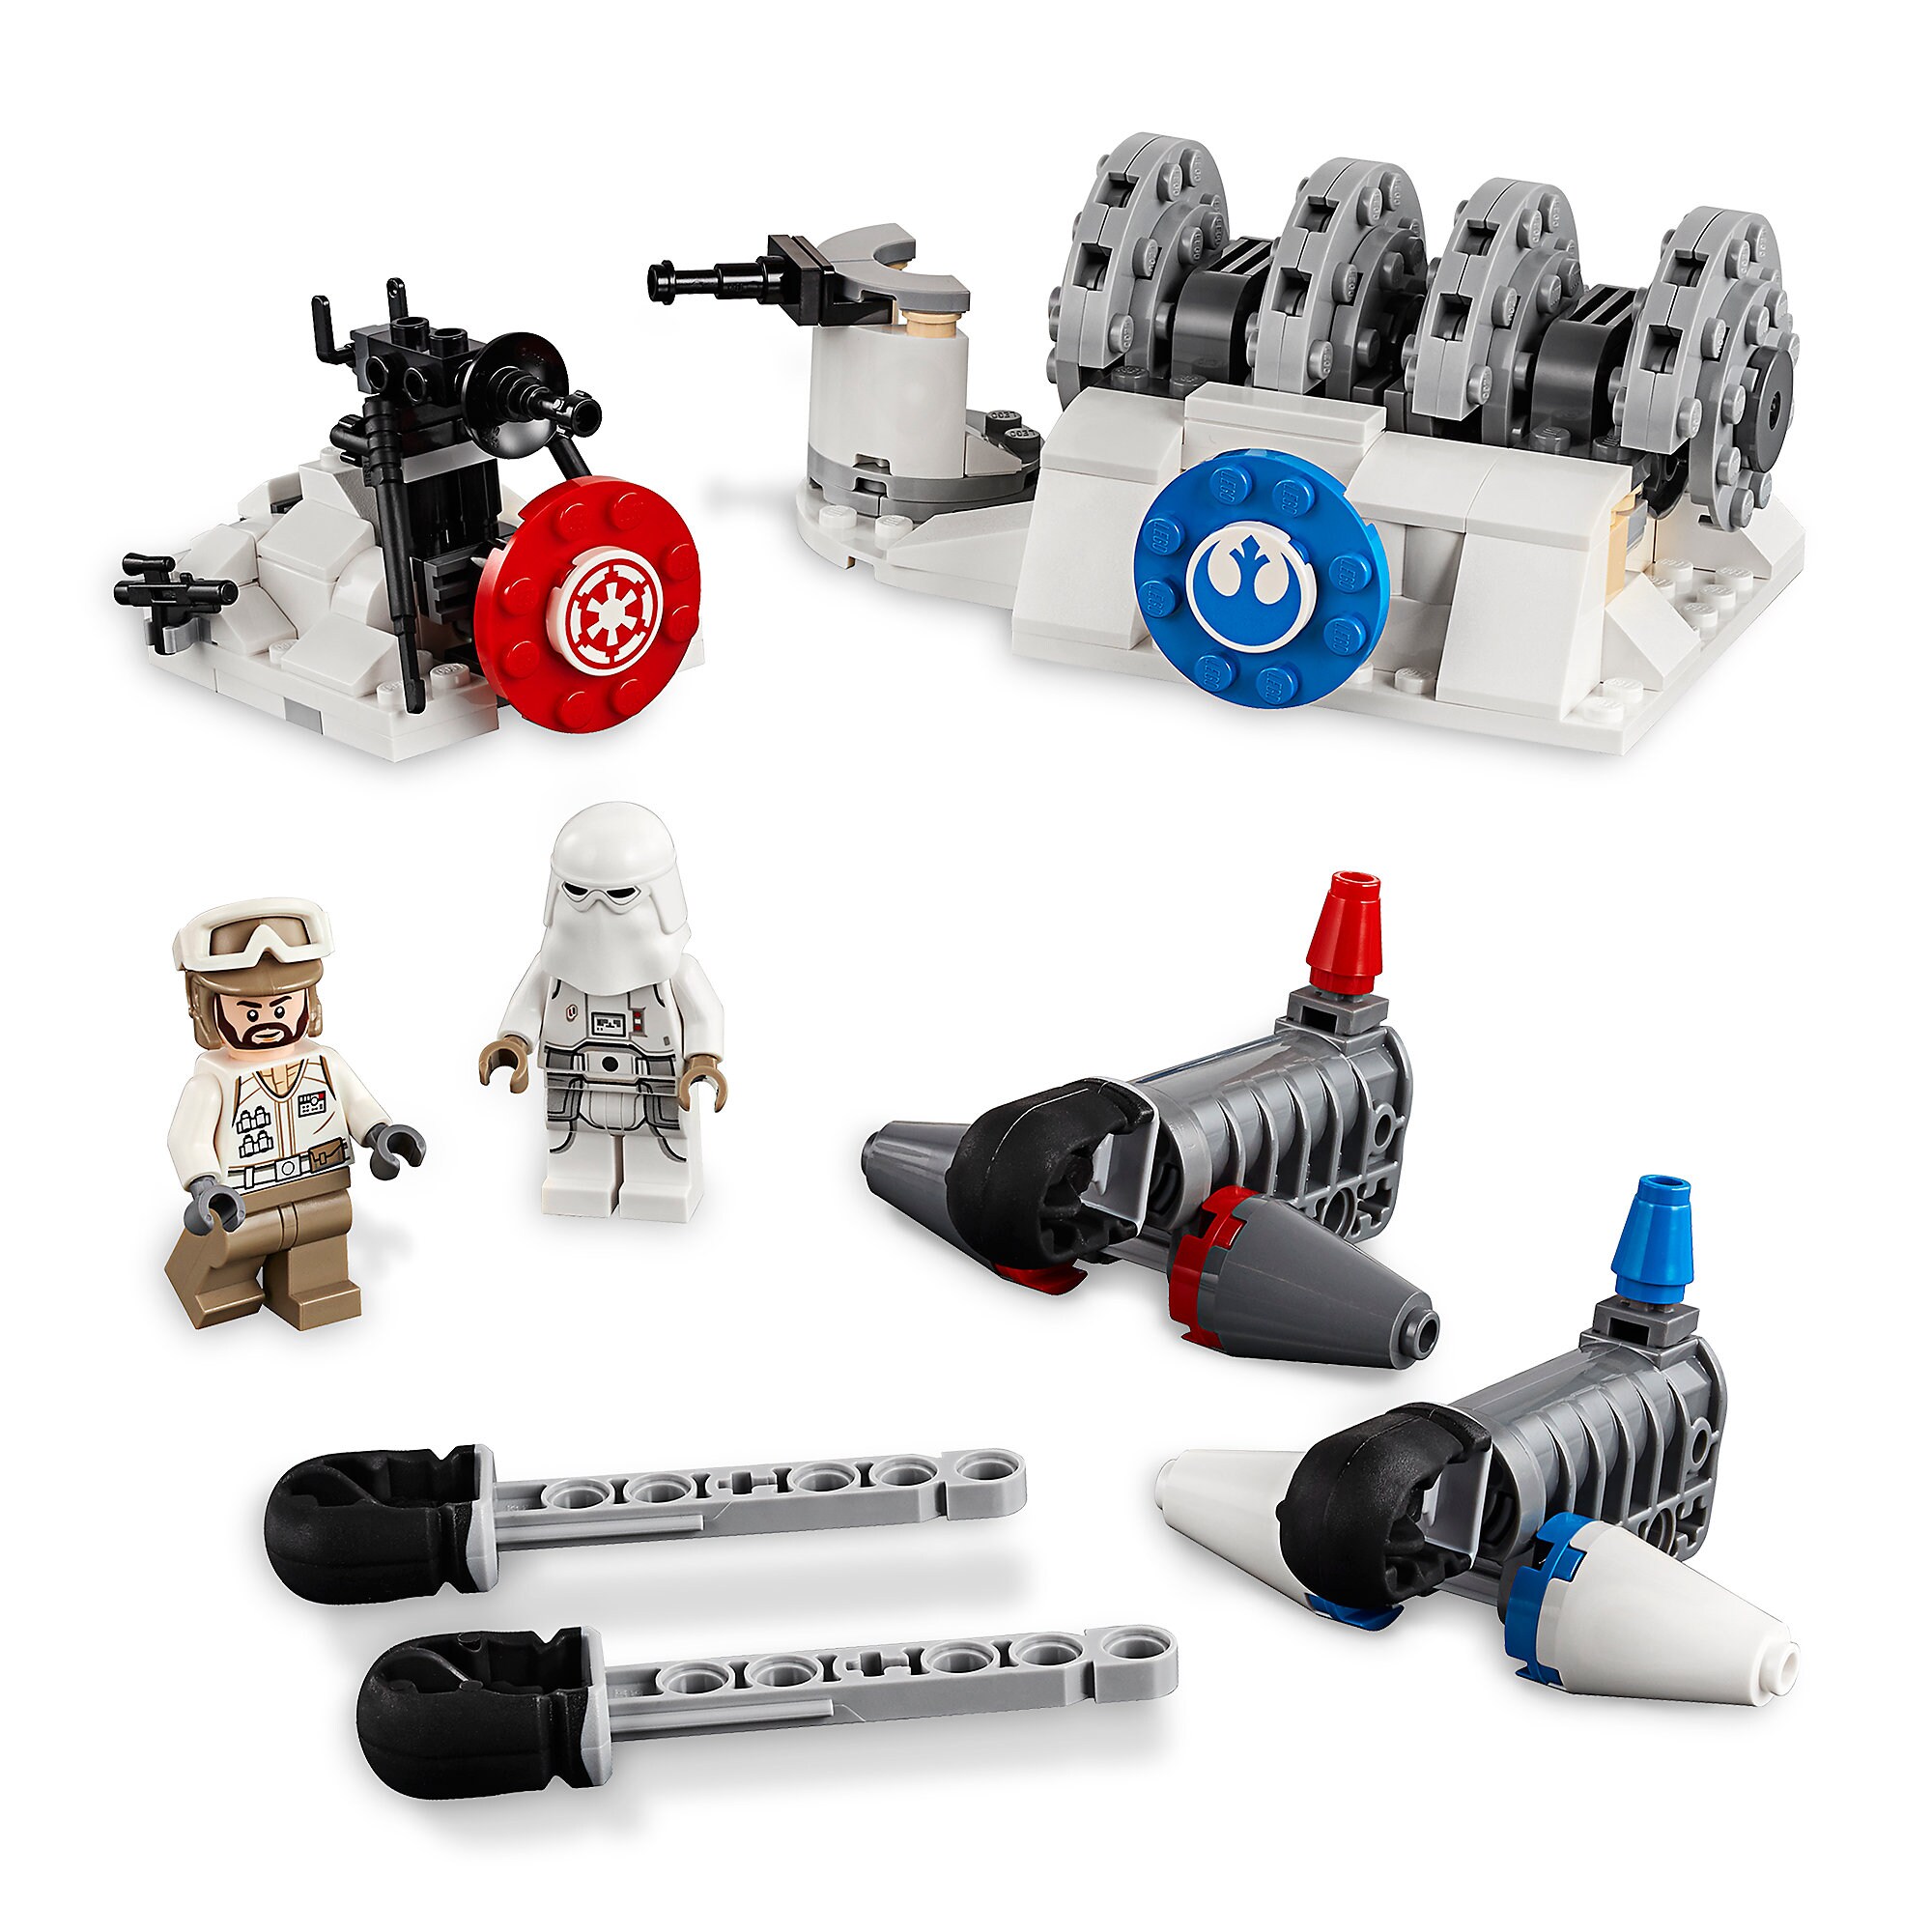 action-battle-hoth-generator-attack-play-set-by-lego-star-wars-the-empire-strikes-back-now